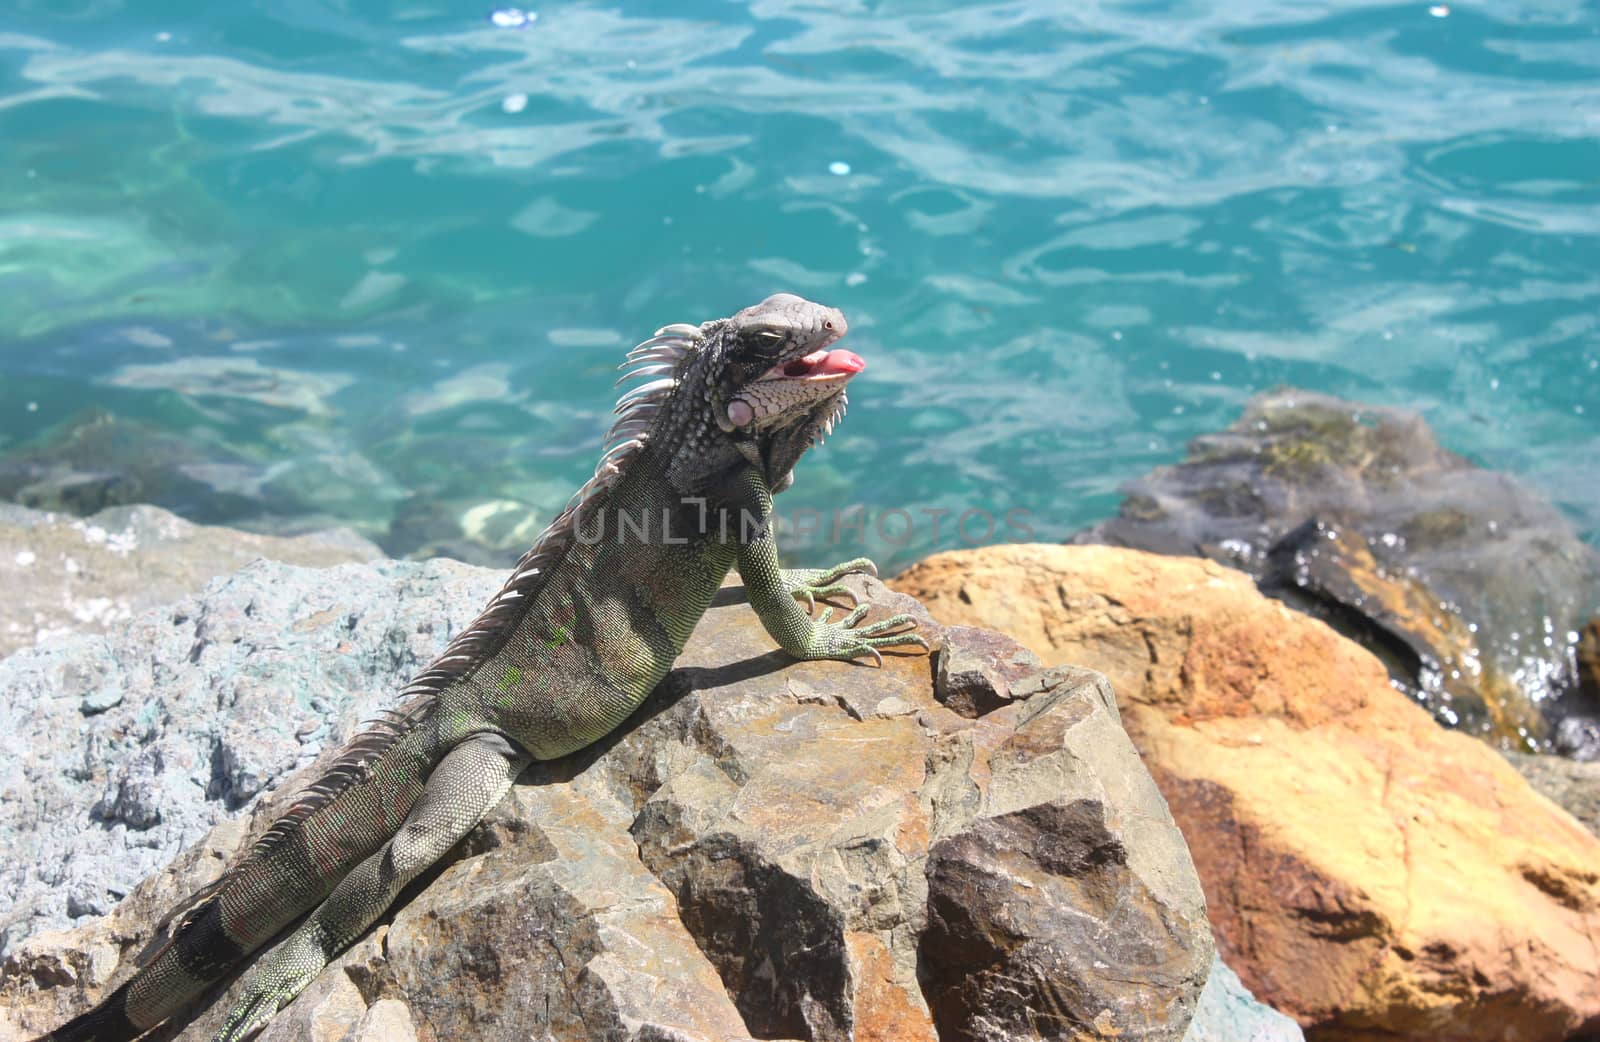 Young iguana on the rock near water